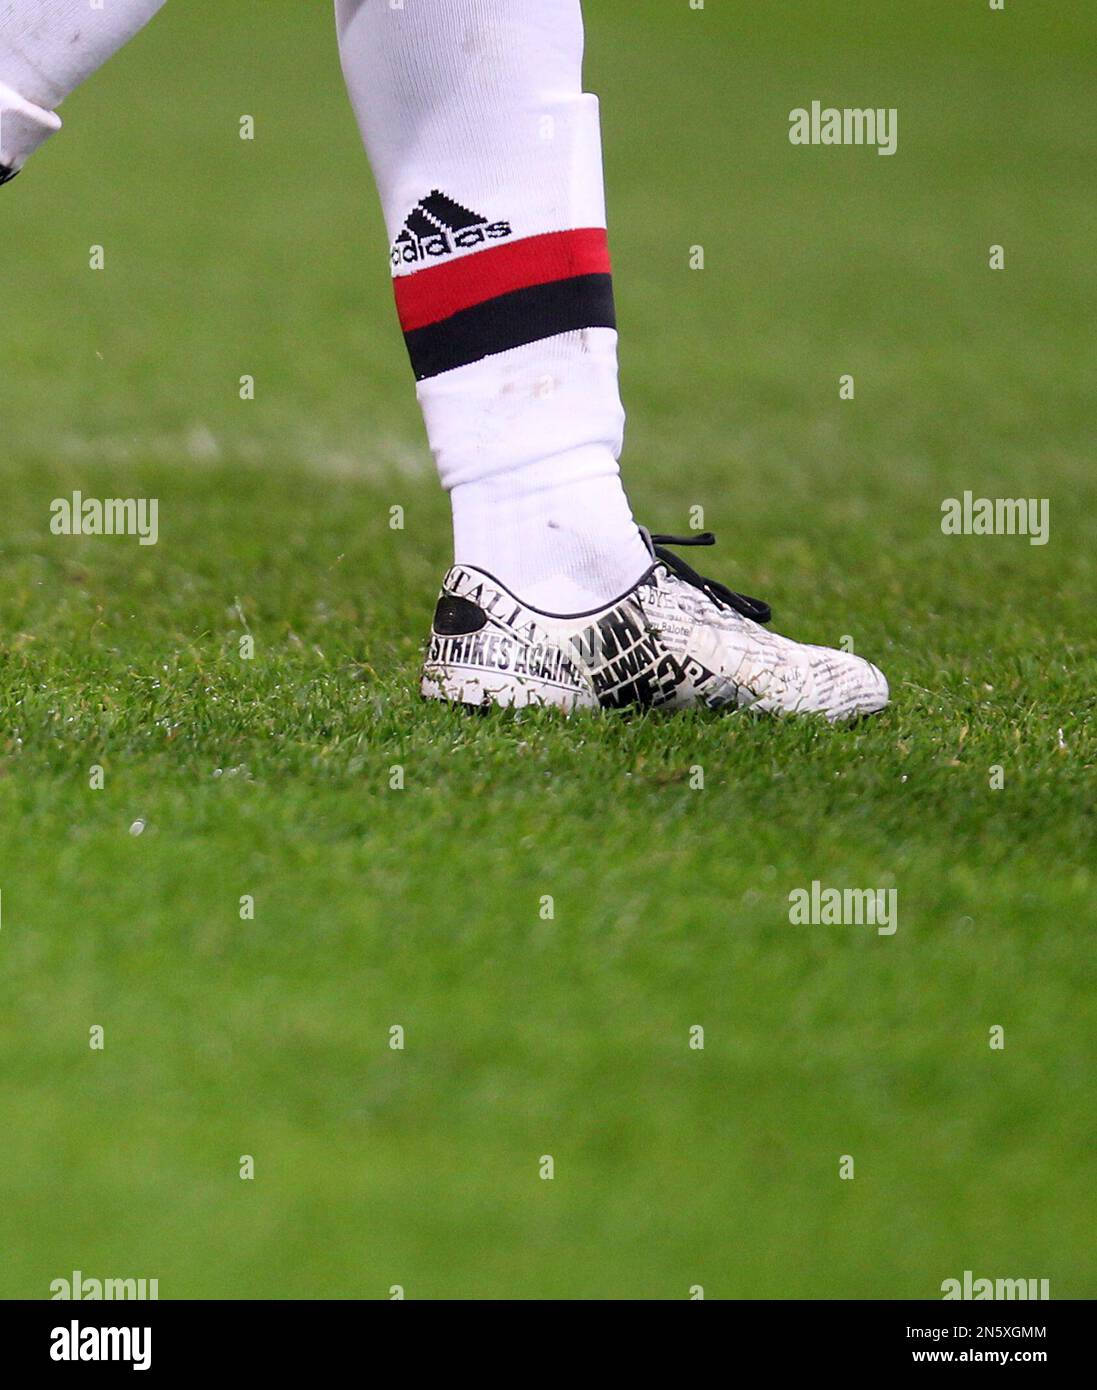 AC Milan forward Mario Balotelli sports a pair of new shoes during the  Serie A soccer match between Inter Milan and AC Milan at the San Siro  stadium in Milan, Italy, Sunday,